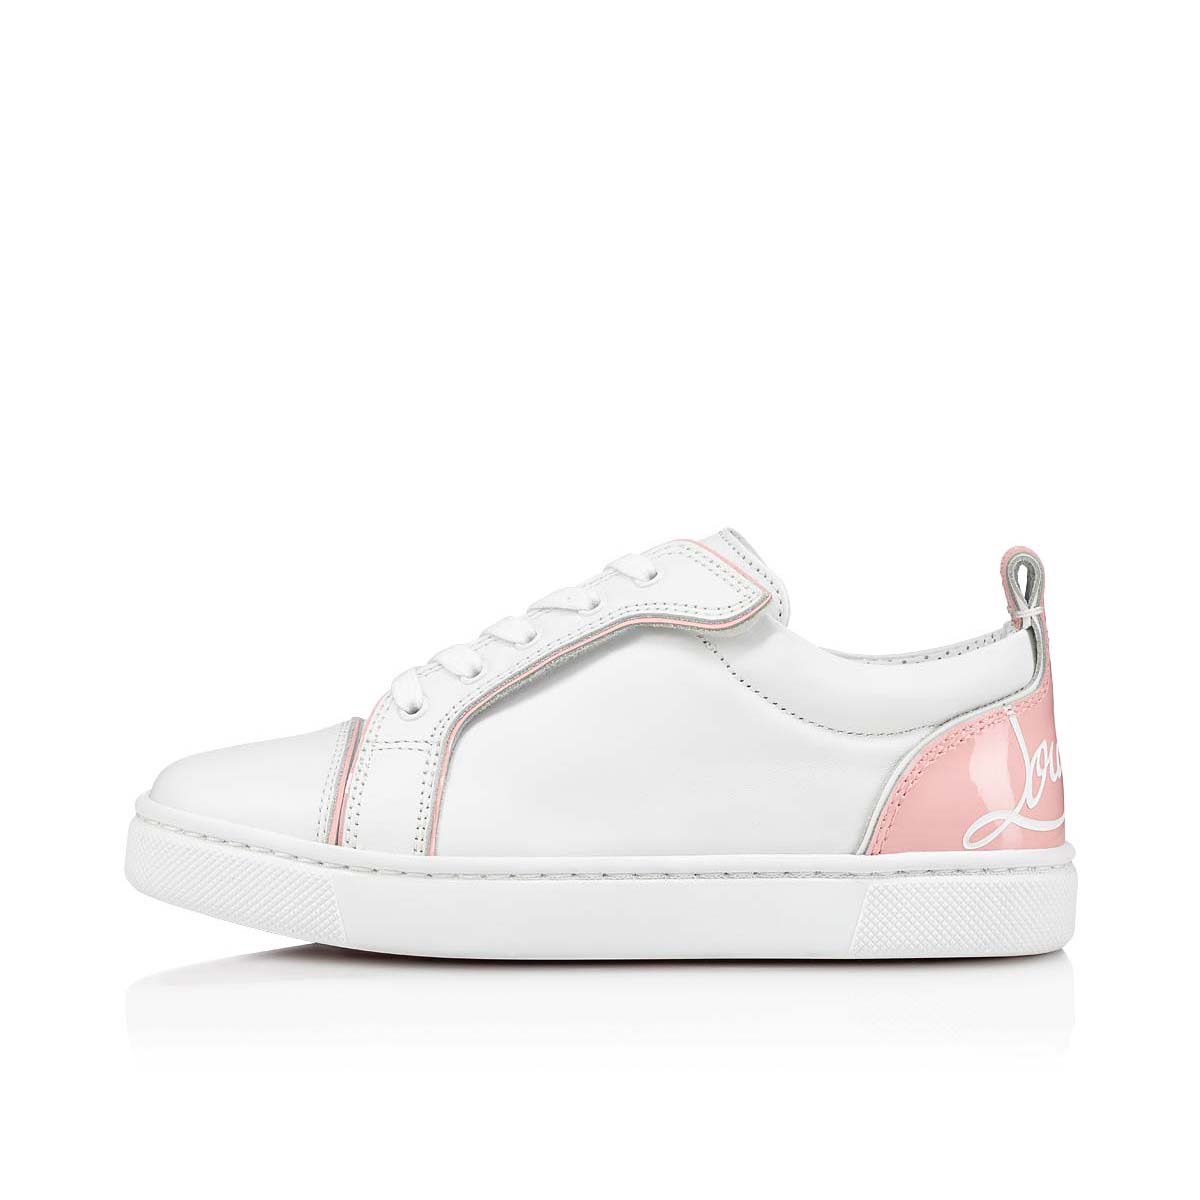 Christian Louboutin Little Girl's & Girl's Funnyto Flat Patent Sneakers - Pink - Size 11.5 (Child)